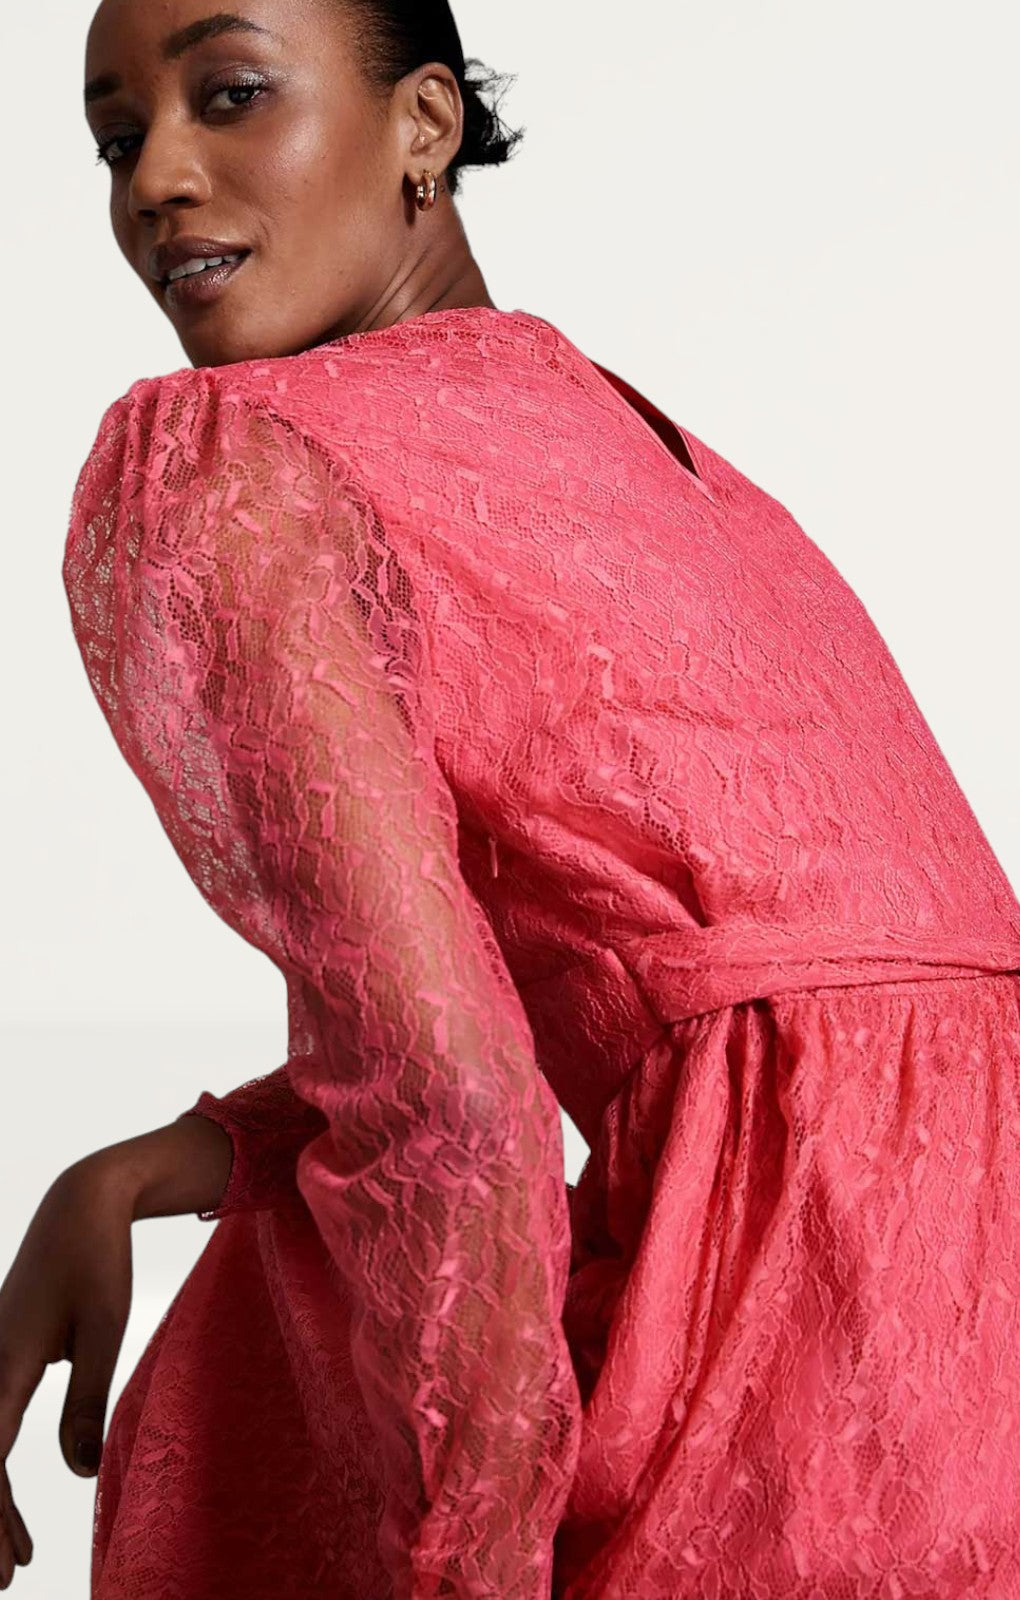 M&S X Ghost Lace Midi Dress product image